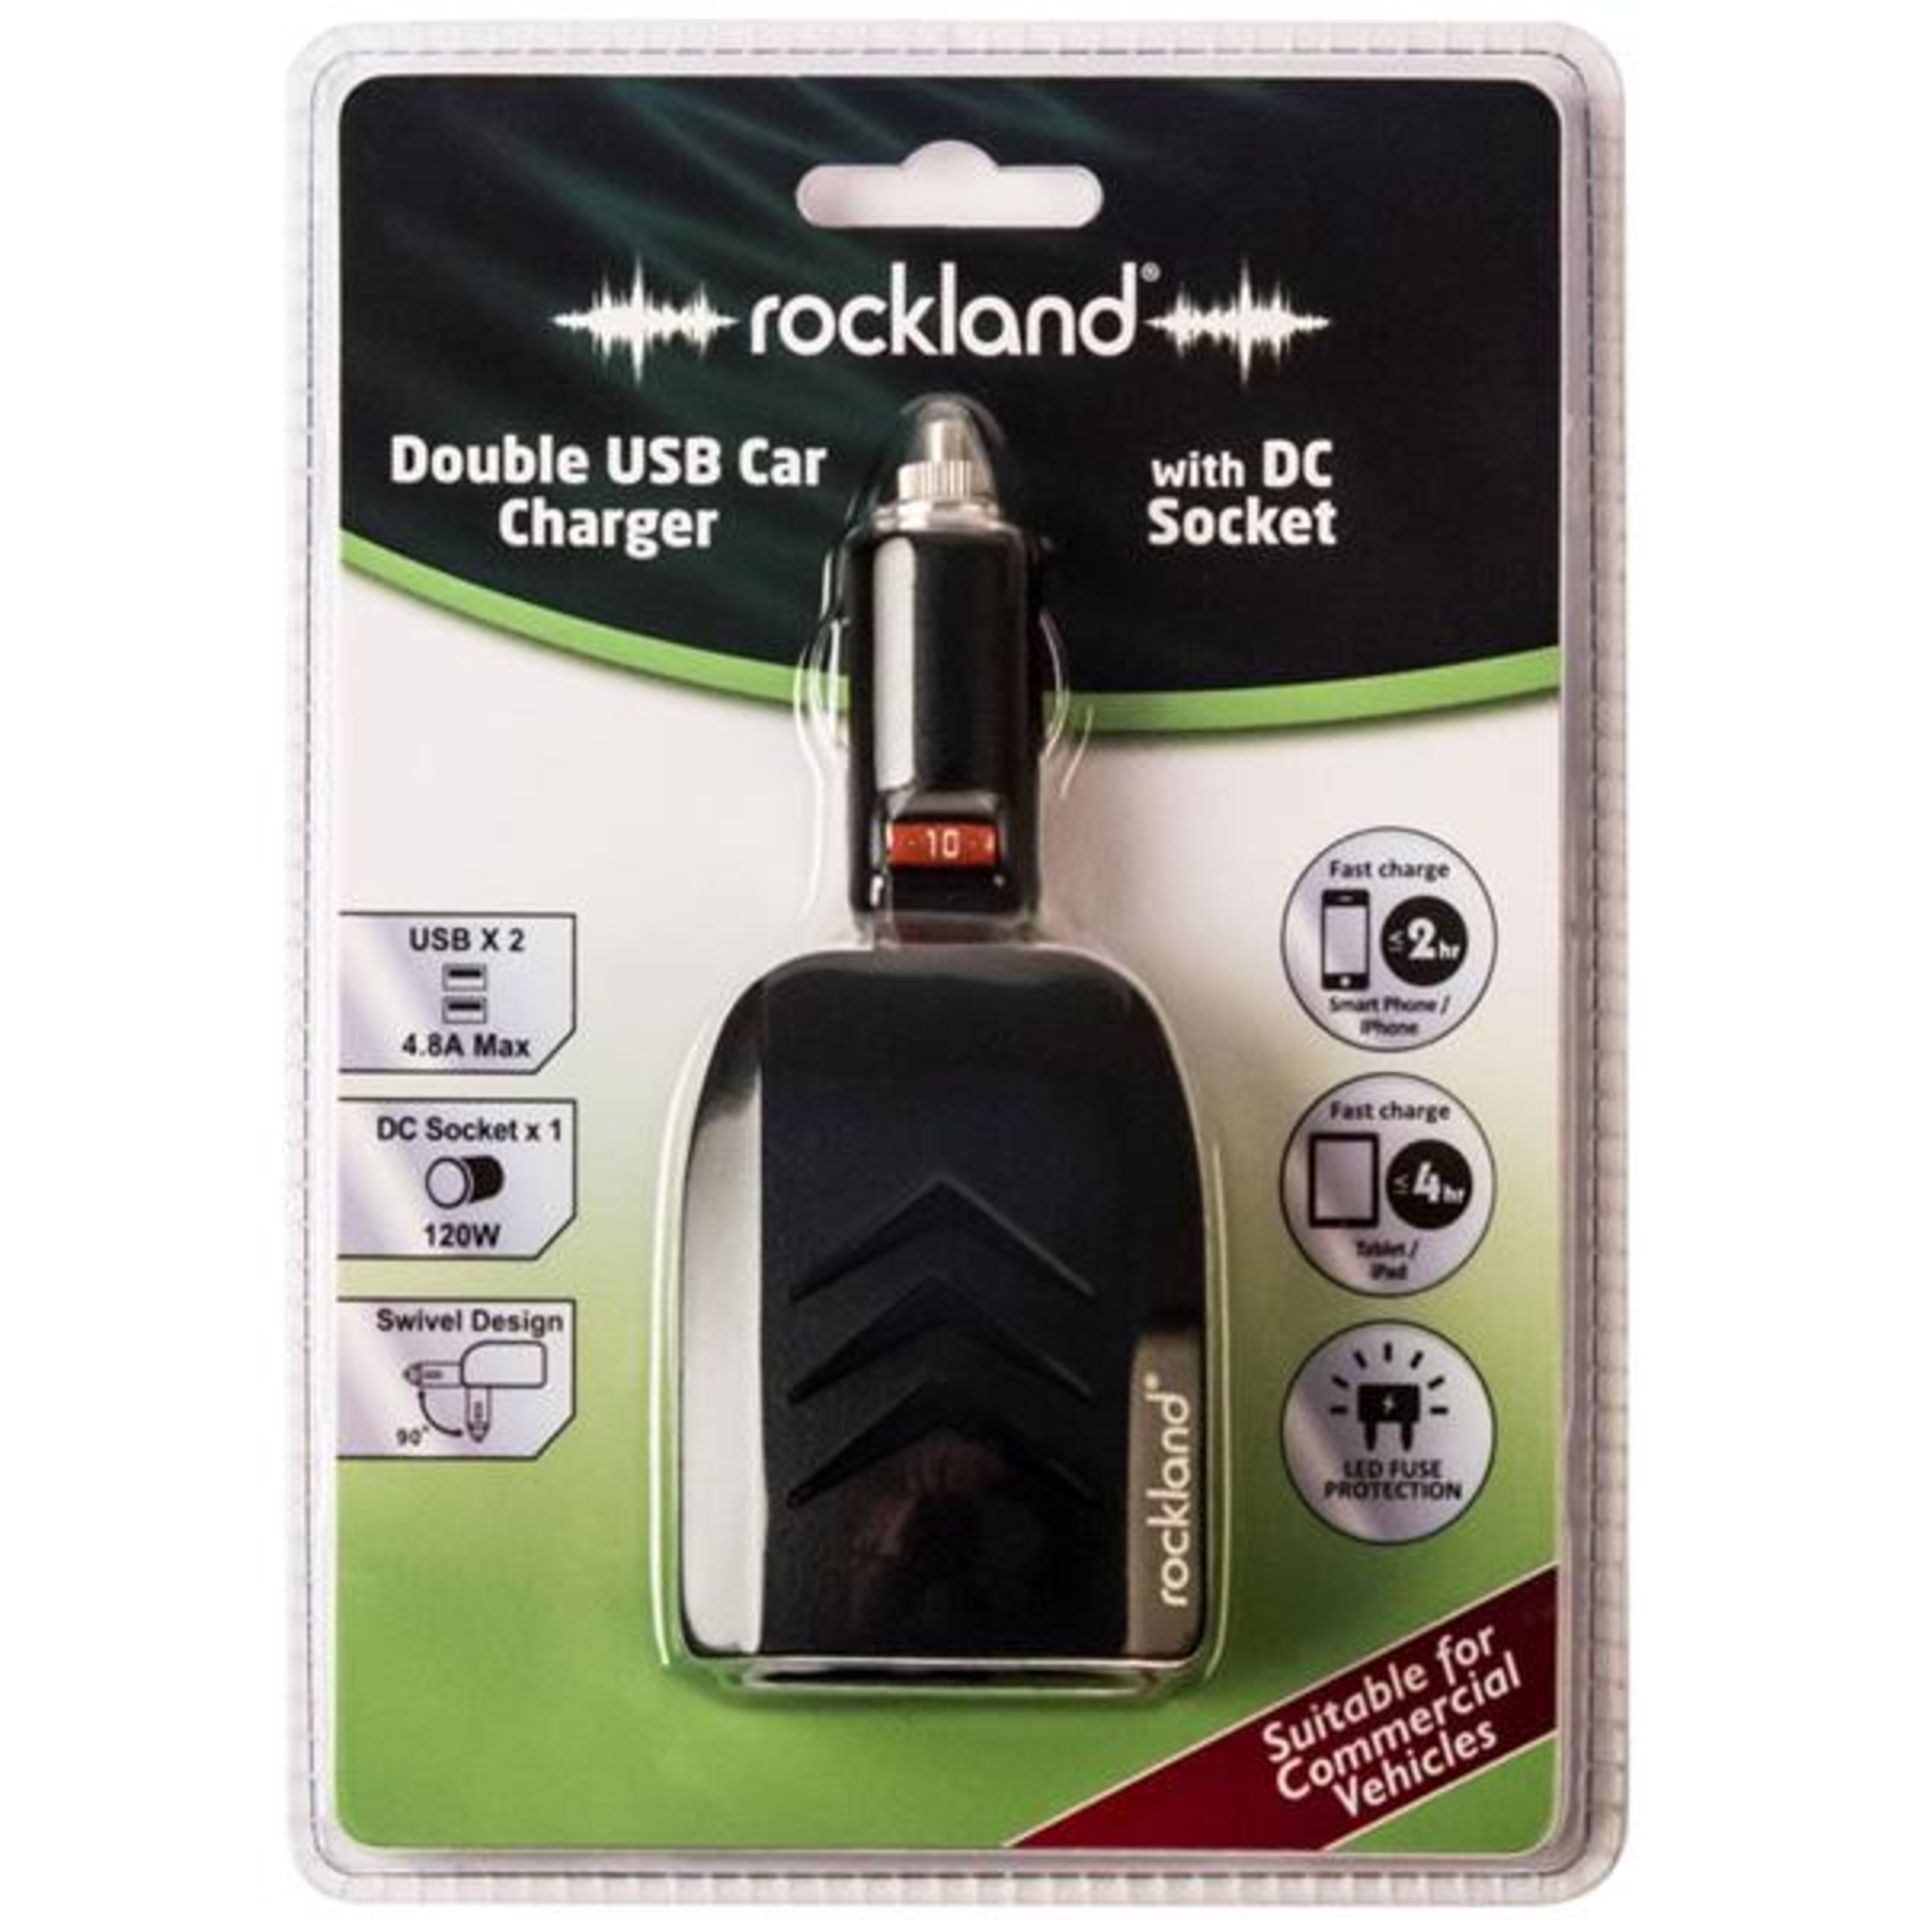 64 X BRAND NEW ROCKLAND DOUBLE USB CAR CHARGERS WITH DC SOCKET (row2top)